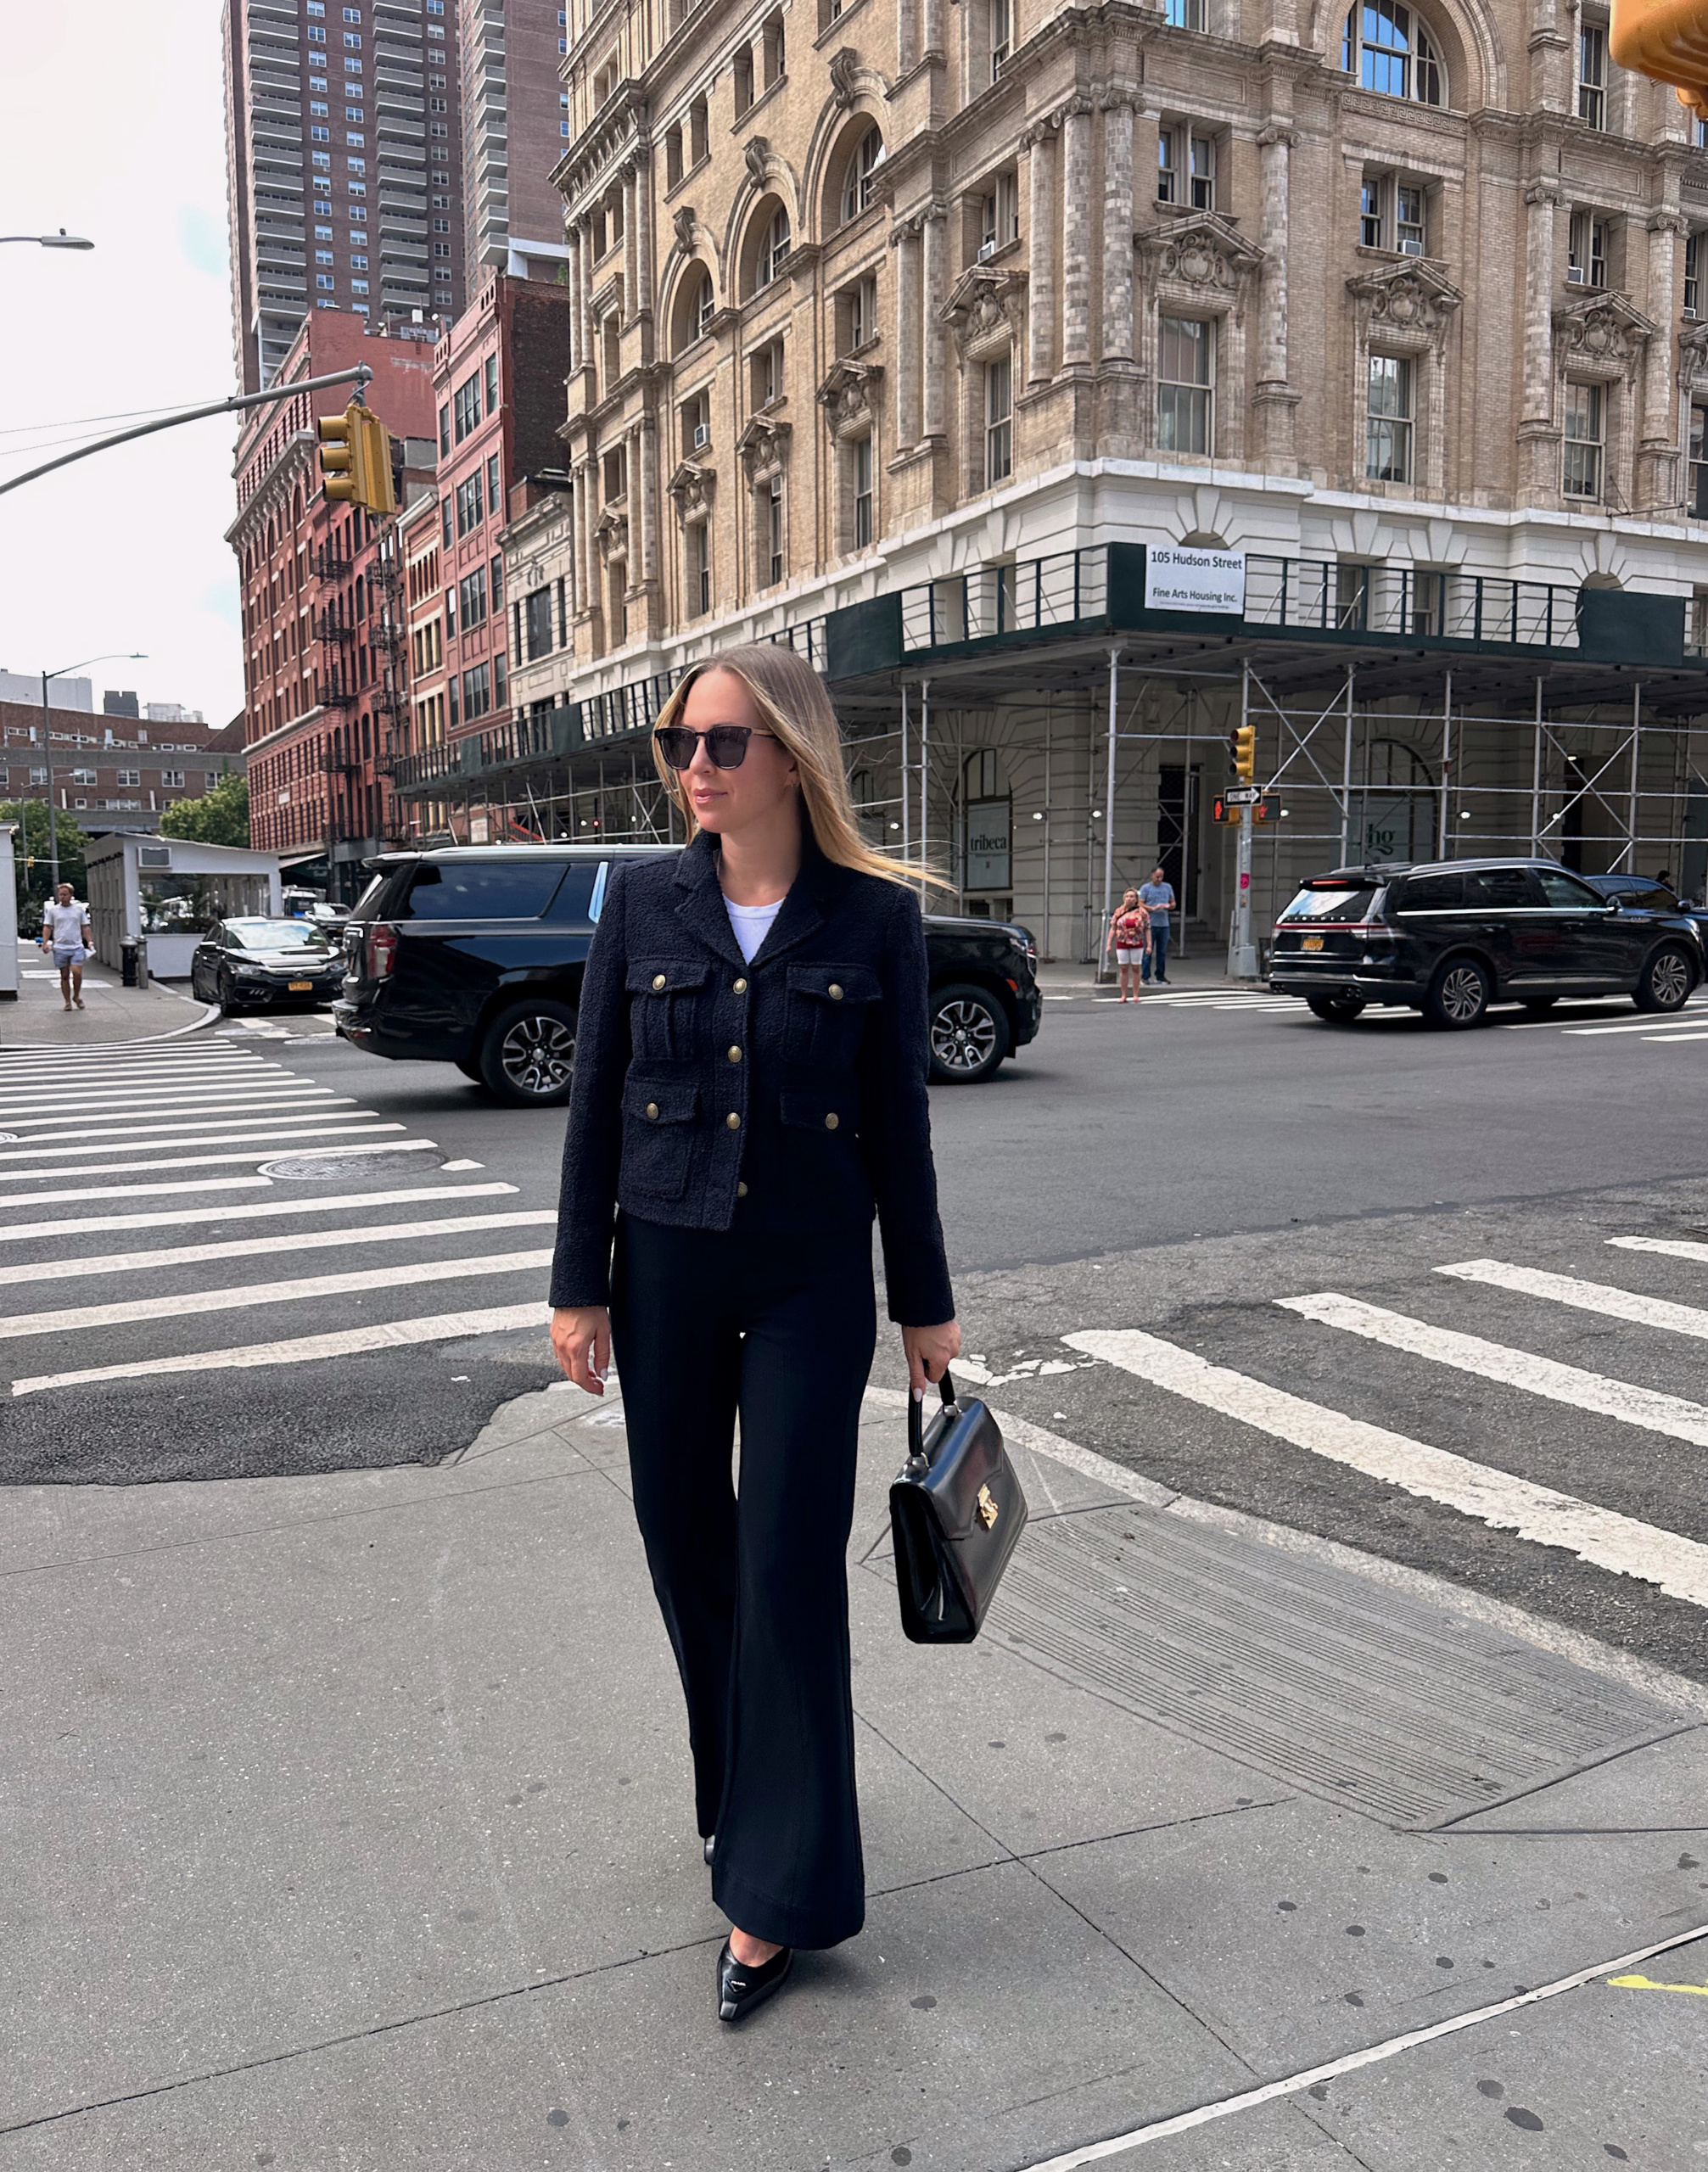 Helena Glazer Brooklyn Blonde blogger wearing Succession Vibe all black outfit